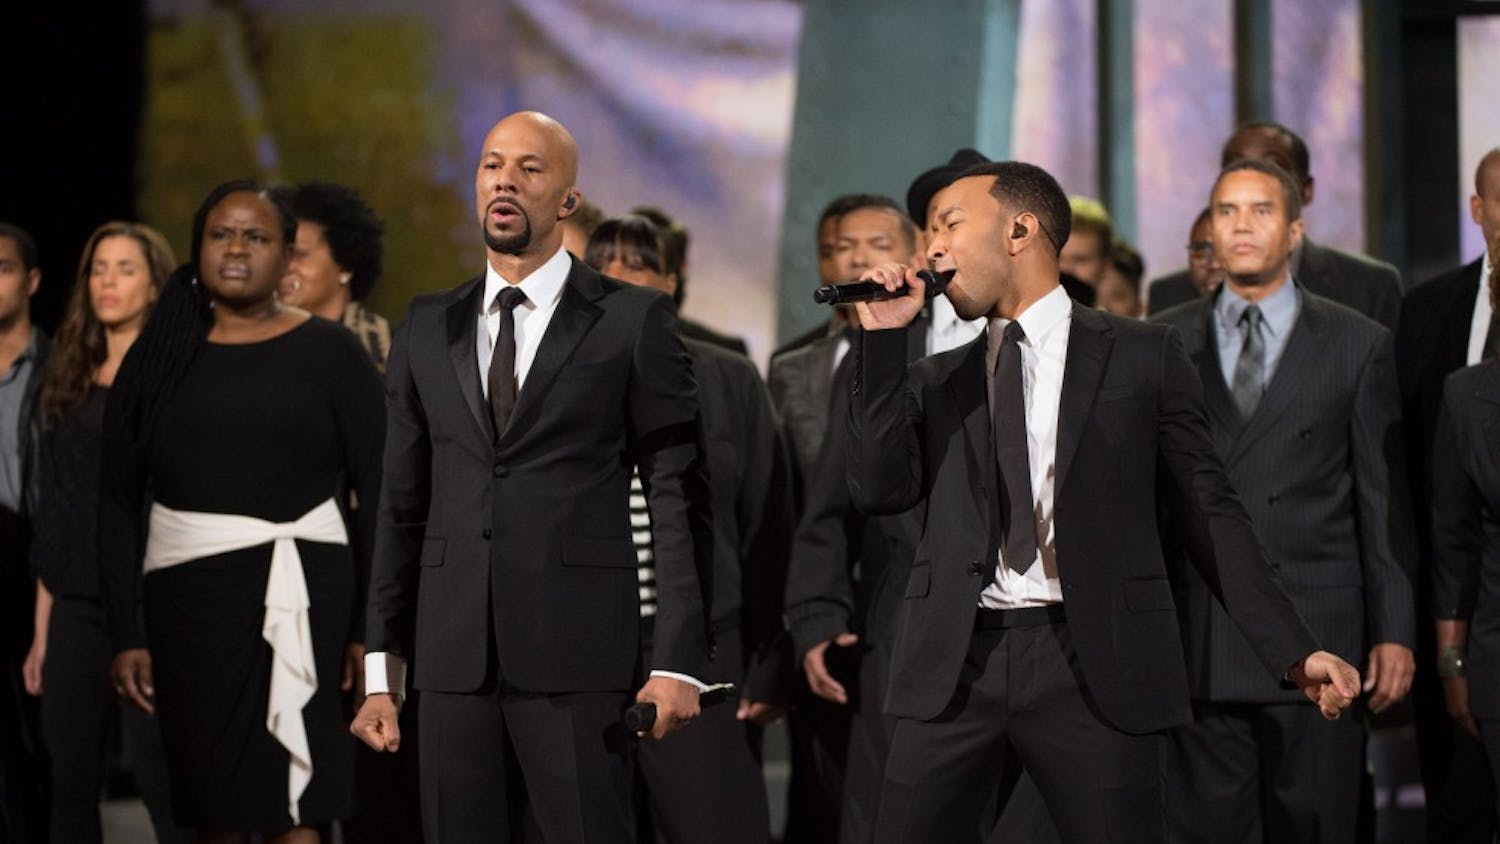 Lonnie Lynn (Common) and John Legend perform with the Oscar® nominated Original Song,  “Glory” from the film "Selma" during the live ABC Telecast of The 87th Oscars® at the Dolby® Theatre in Hollywood, CA on Sunday, February 22, 2015.